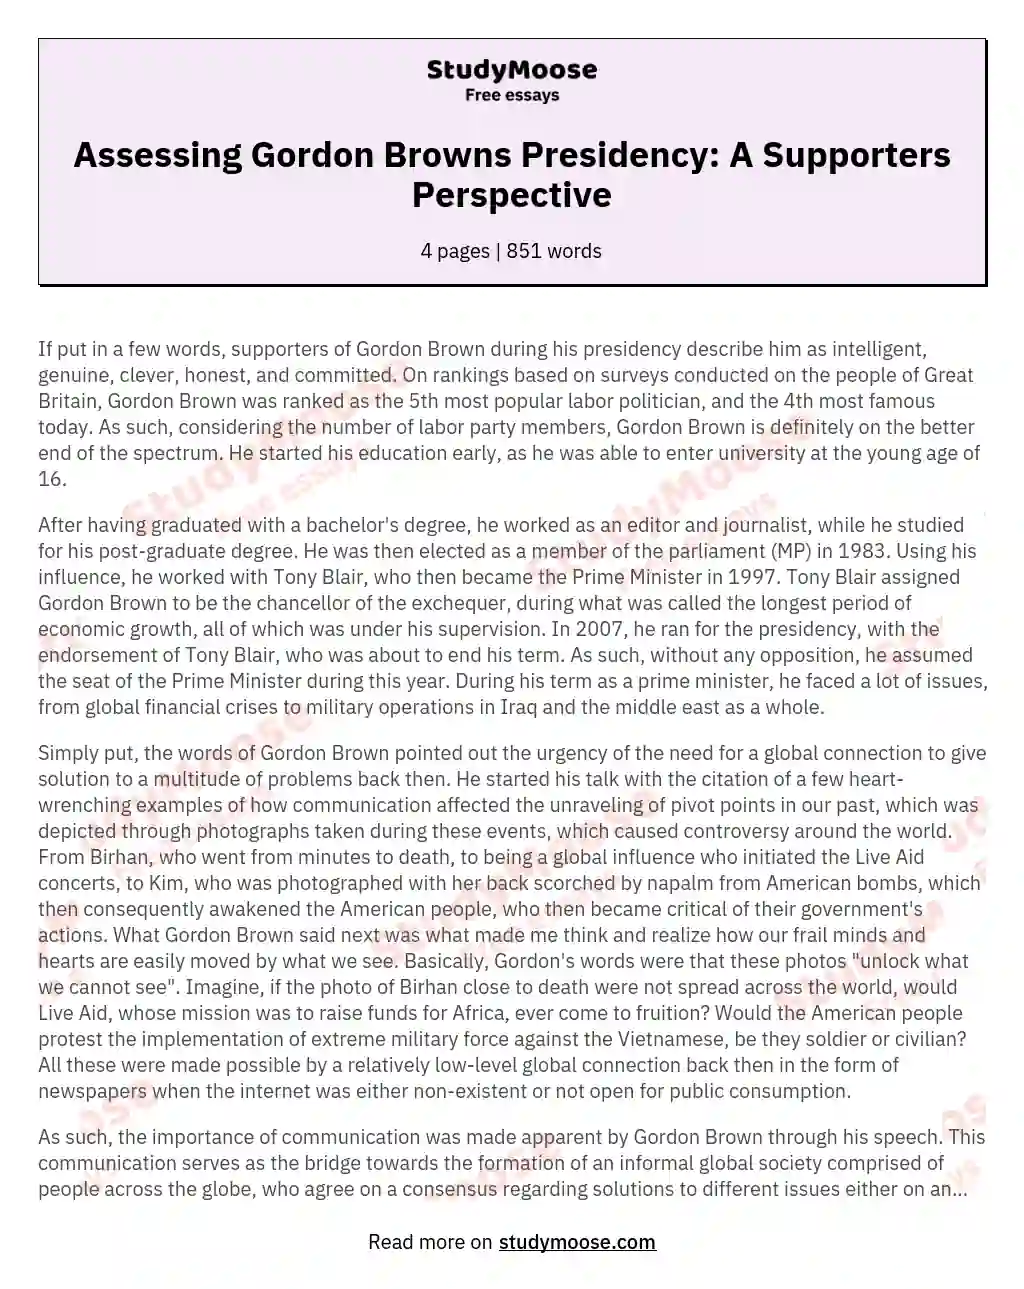 Assessing Gordon Browns Presidency: A Supporters Perspective essay